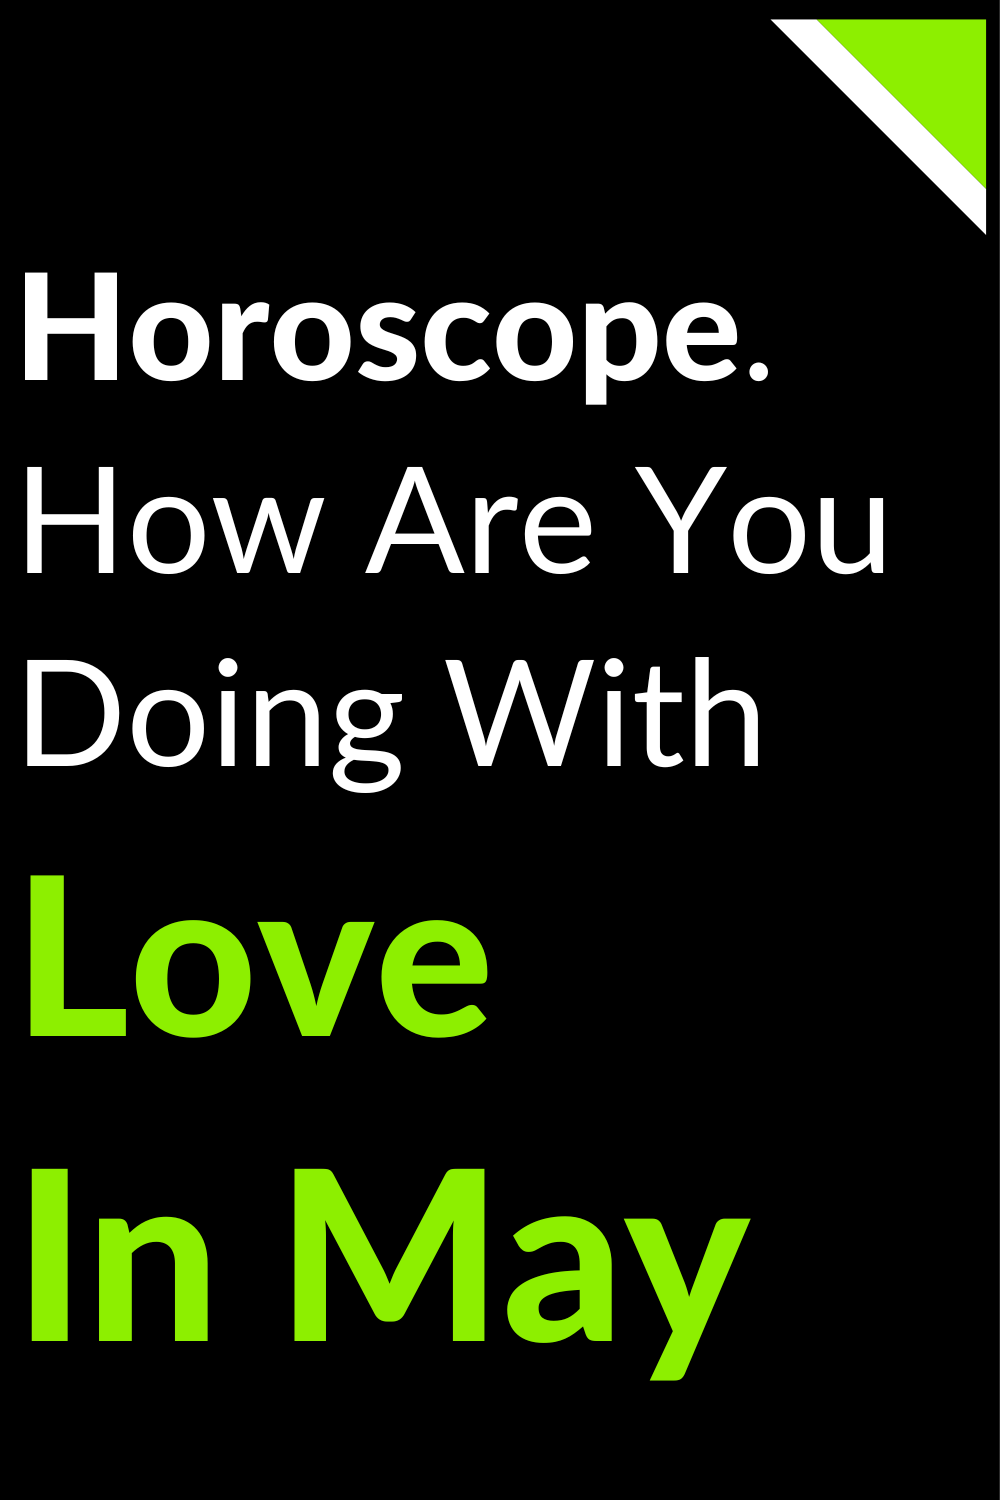 Horoscope. How Are You Doing With Love In May